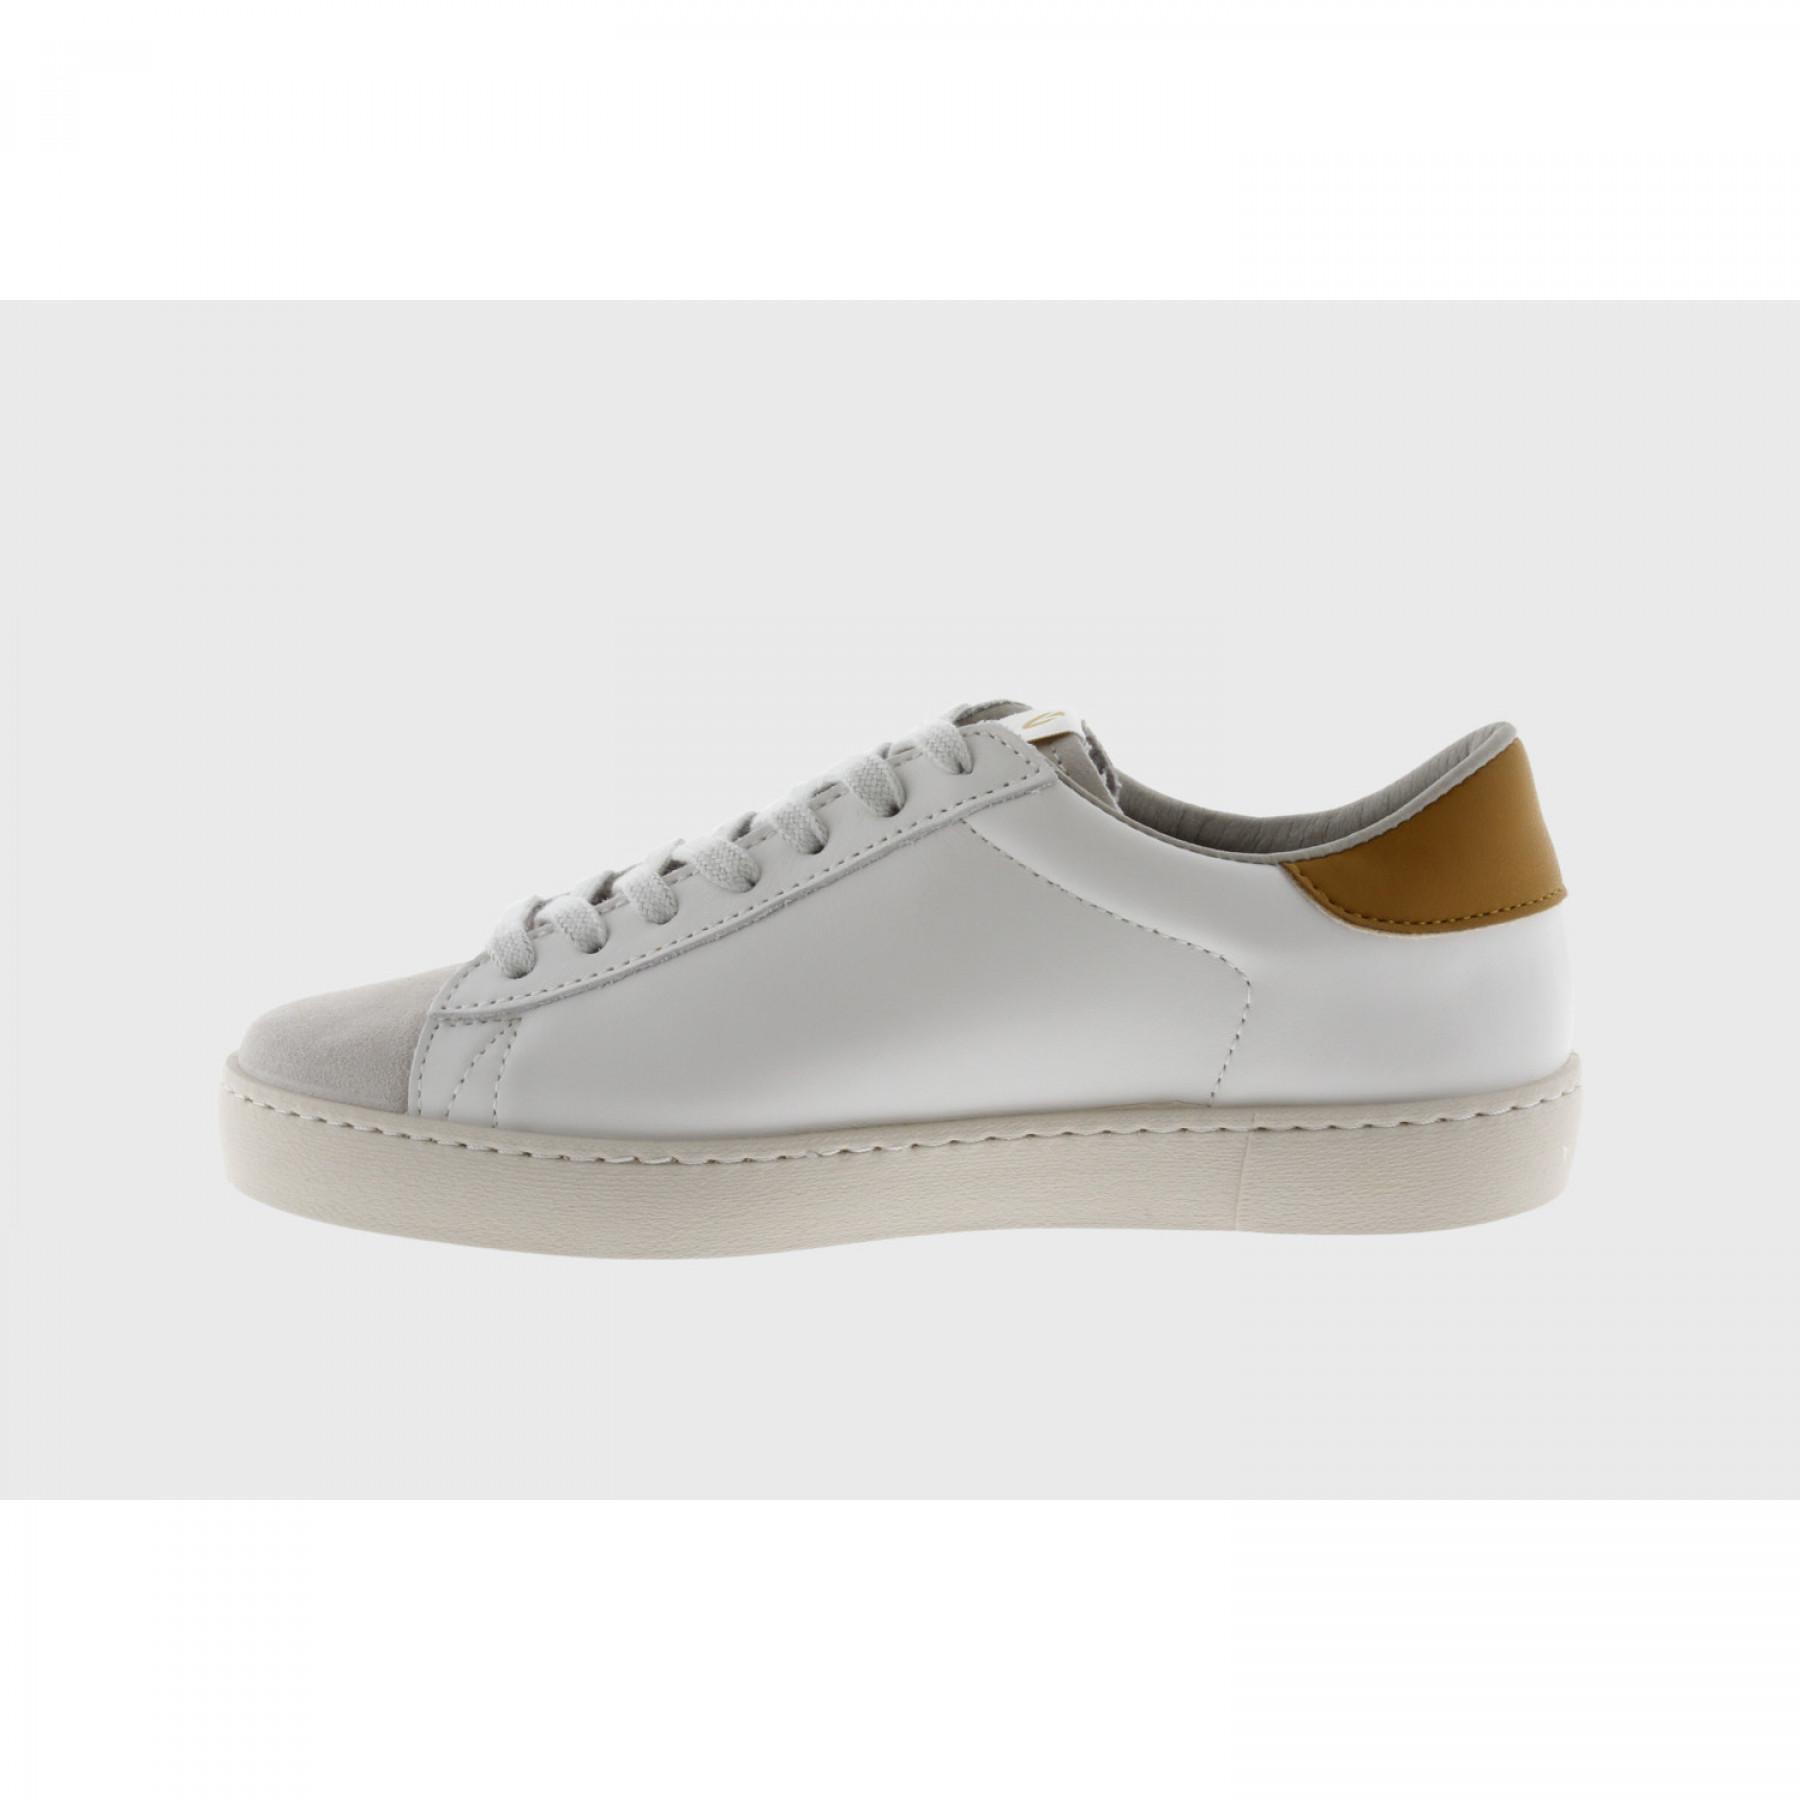 Leather sneakers Victoria berlin constraste (grandes tailles)